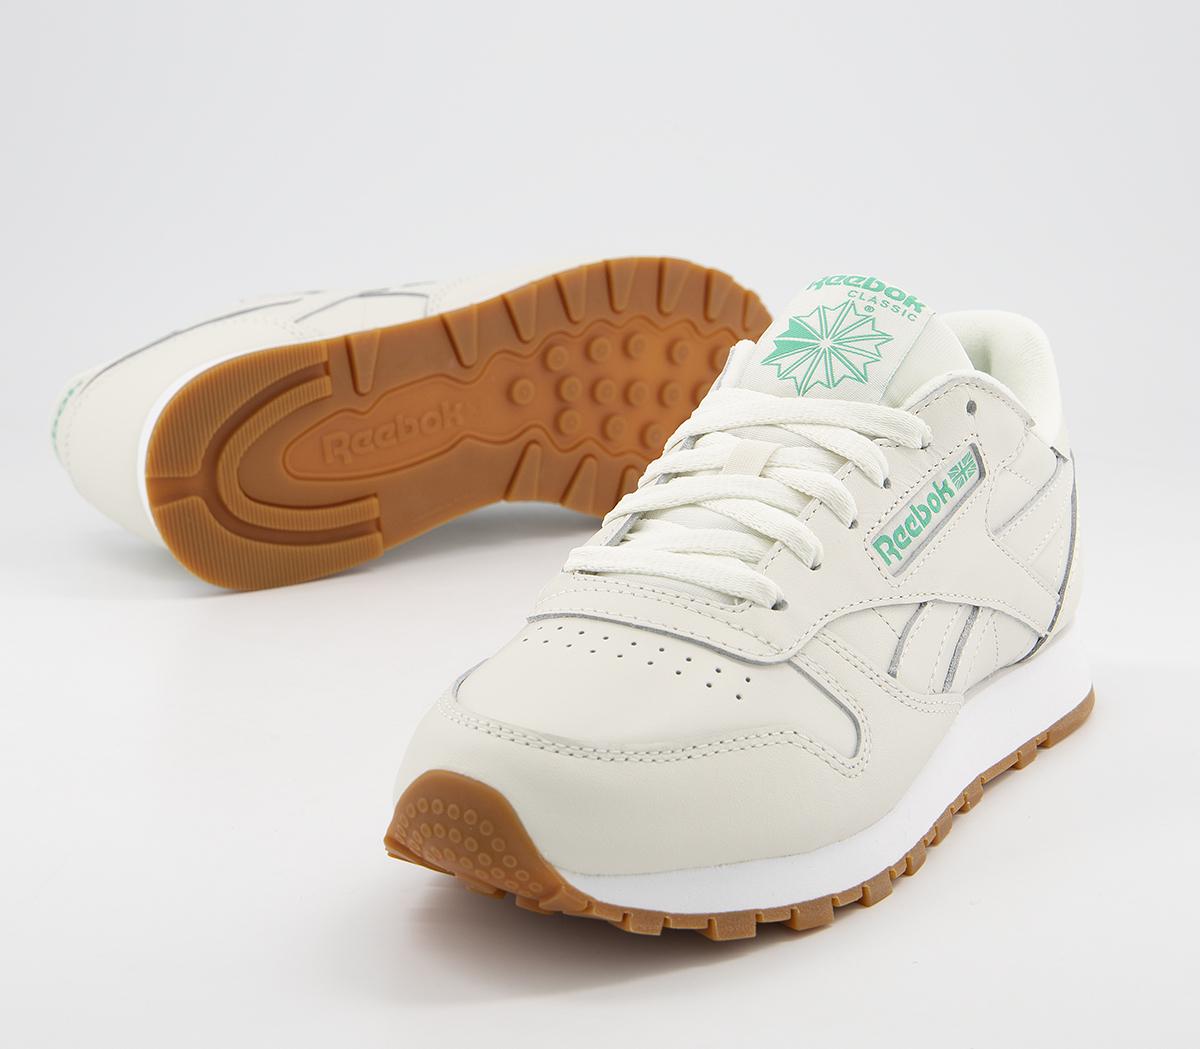 Reebok Cl Leather Trainers Chalk Green White - Hers trainers